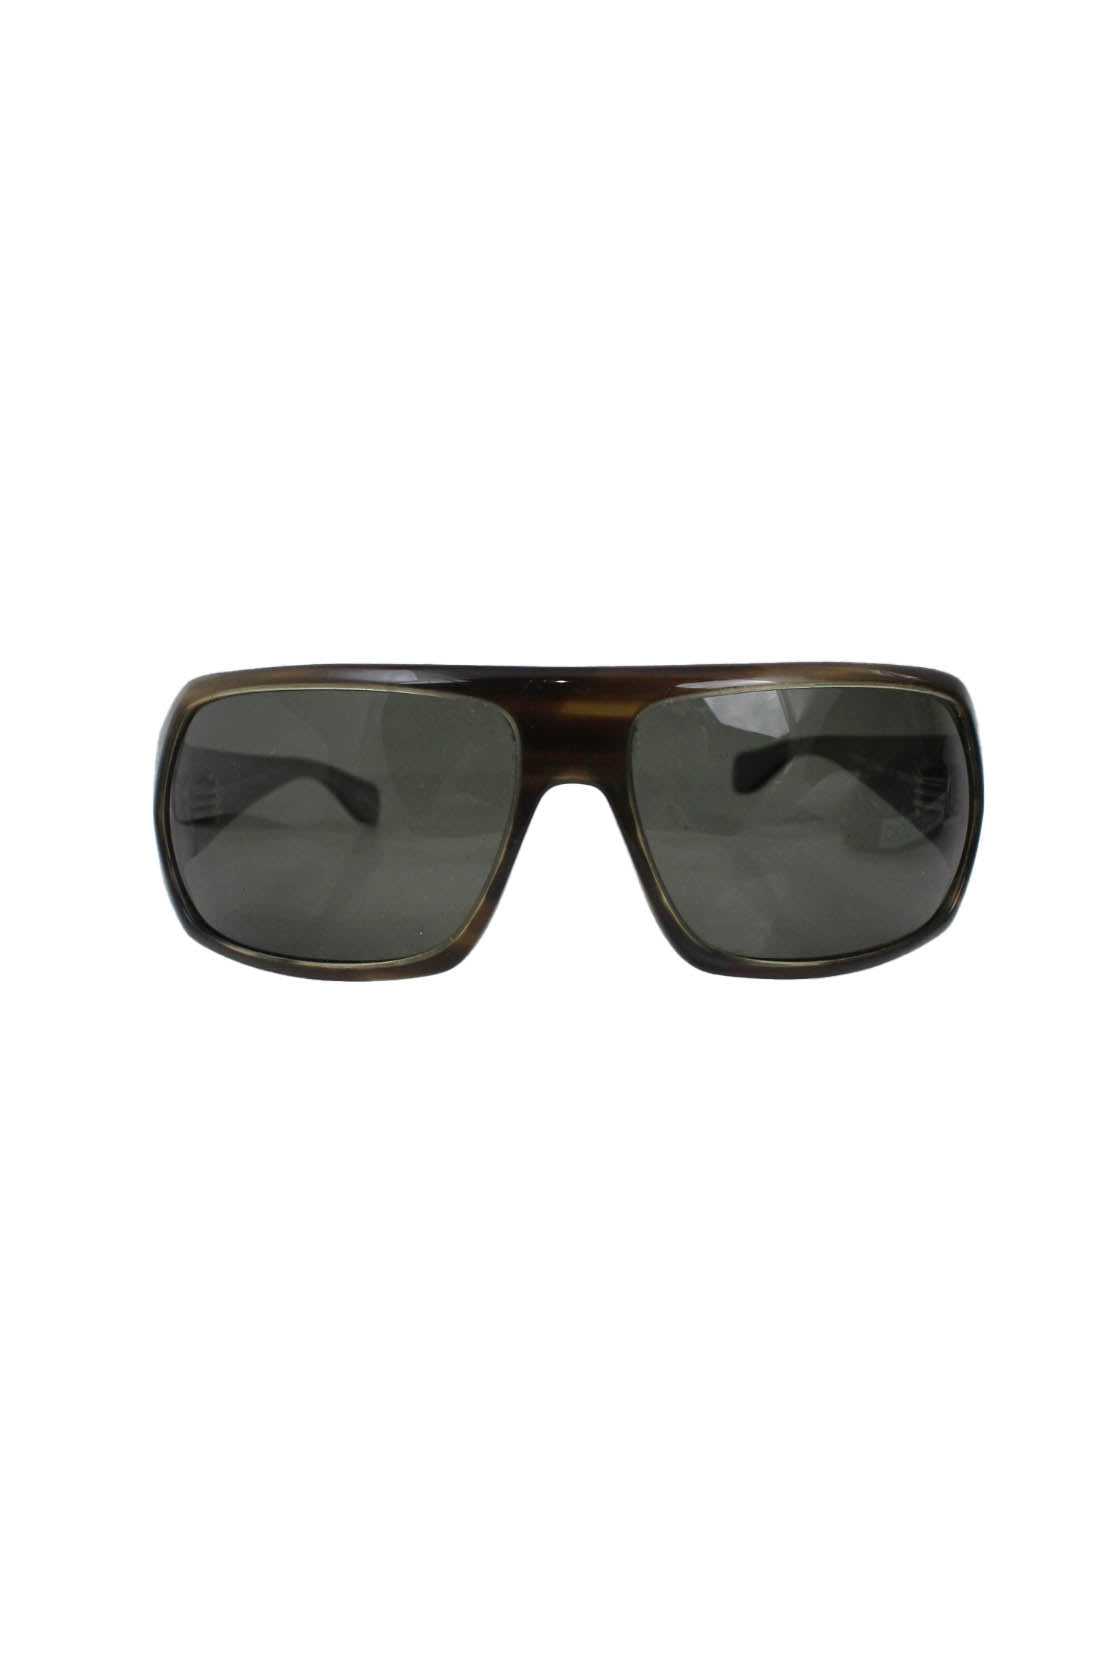 description: oliver people's conway olive sunglasses. features rectangular shape, polarized lenses, and resin-effect at frame throughout. 